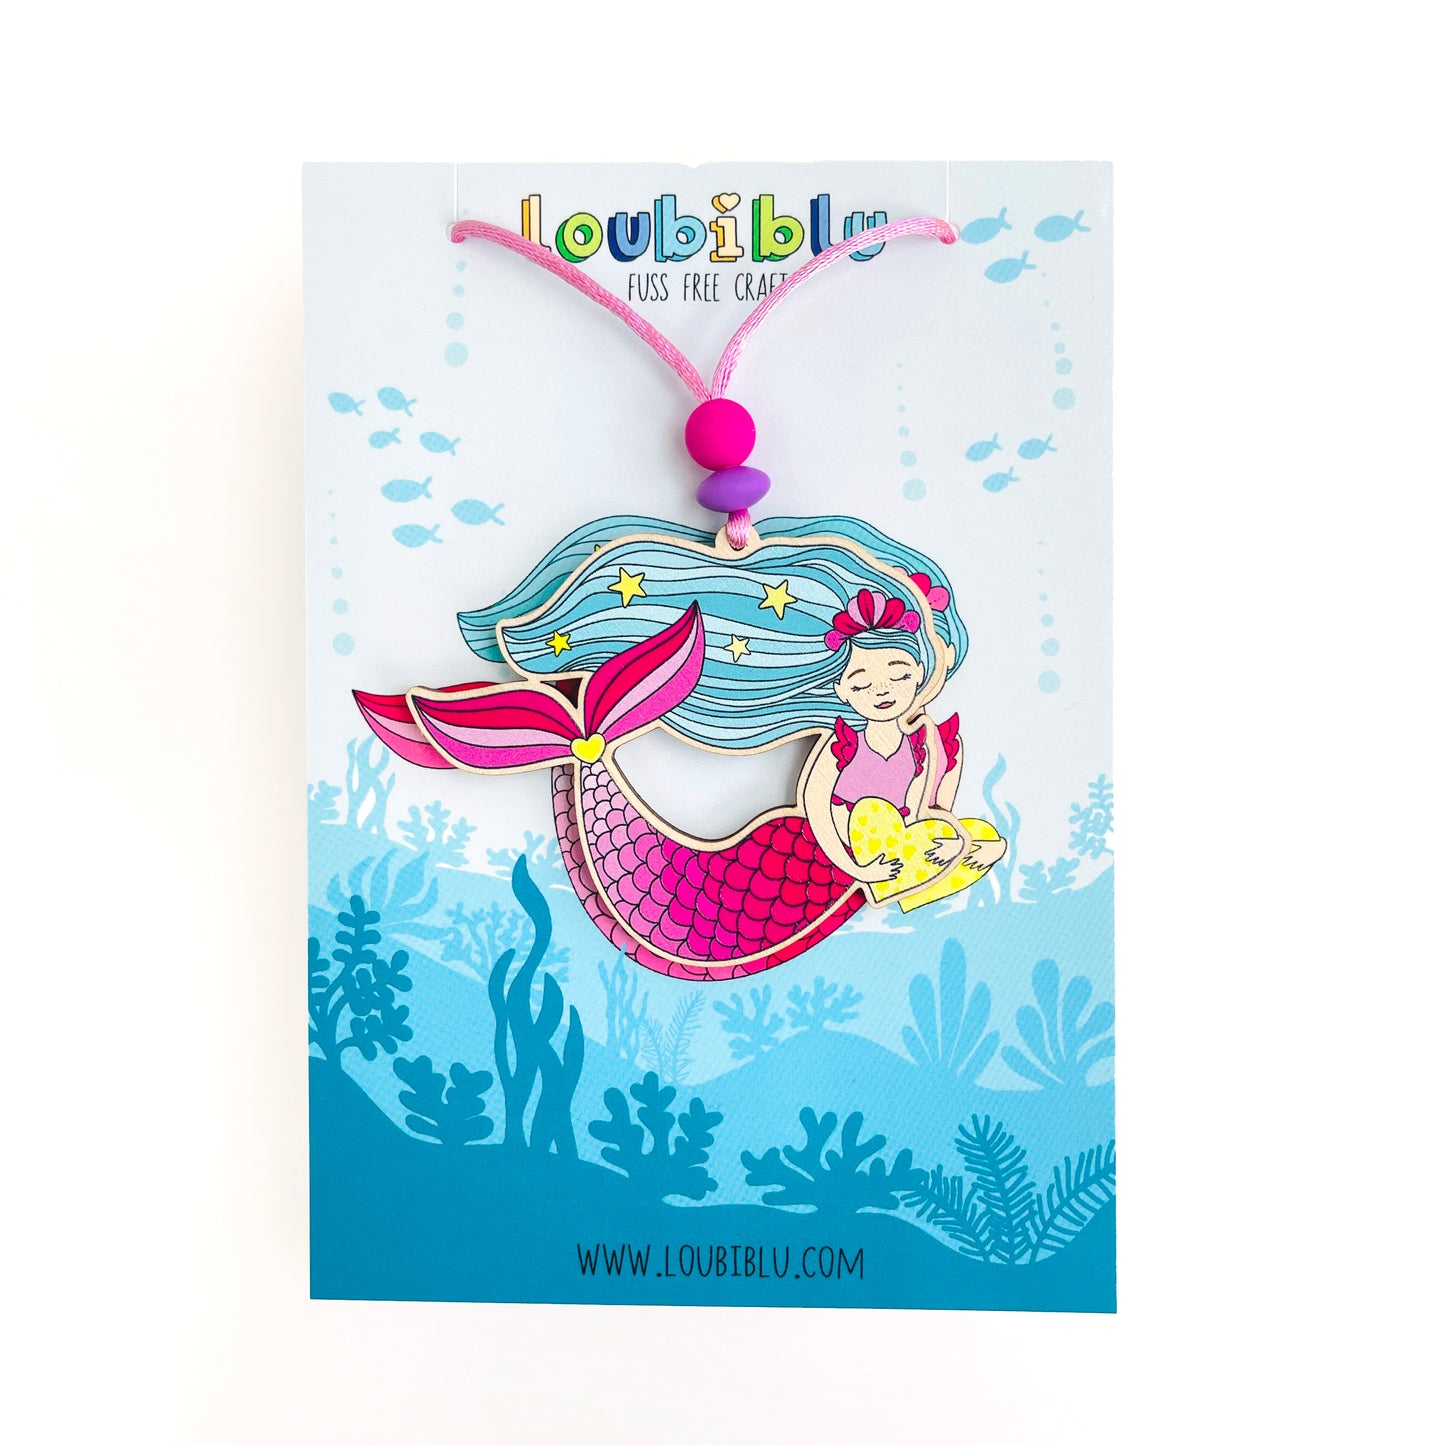 Load image into Gallery viewer, Mermaid Necklace
